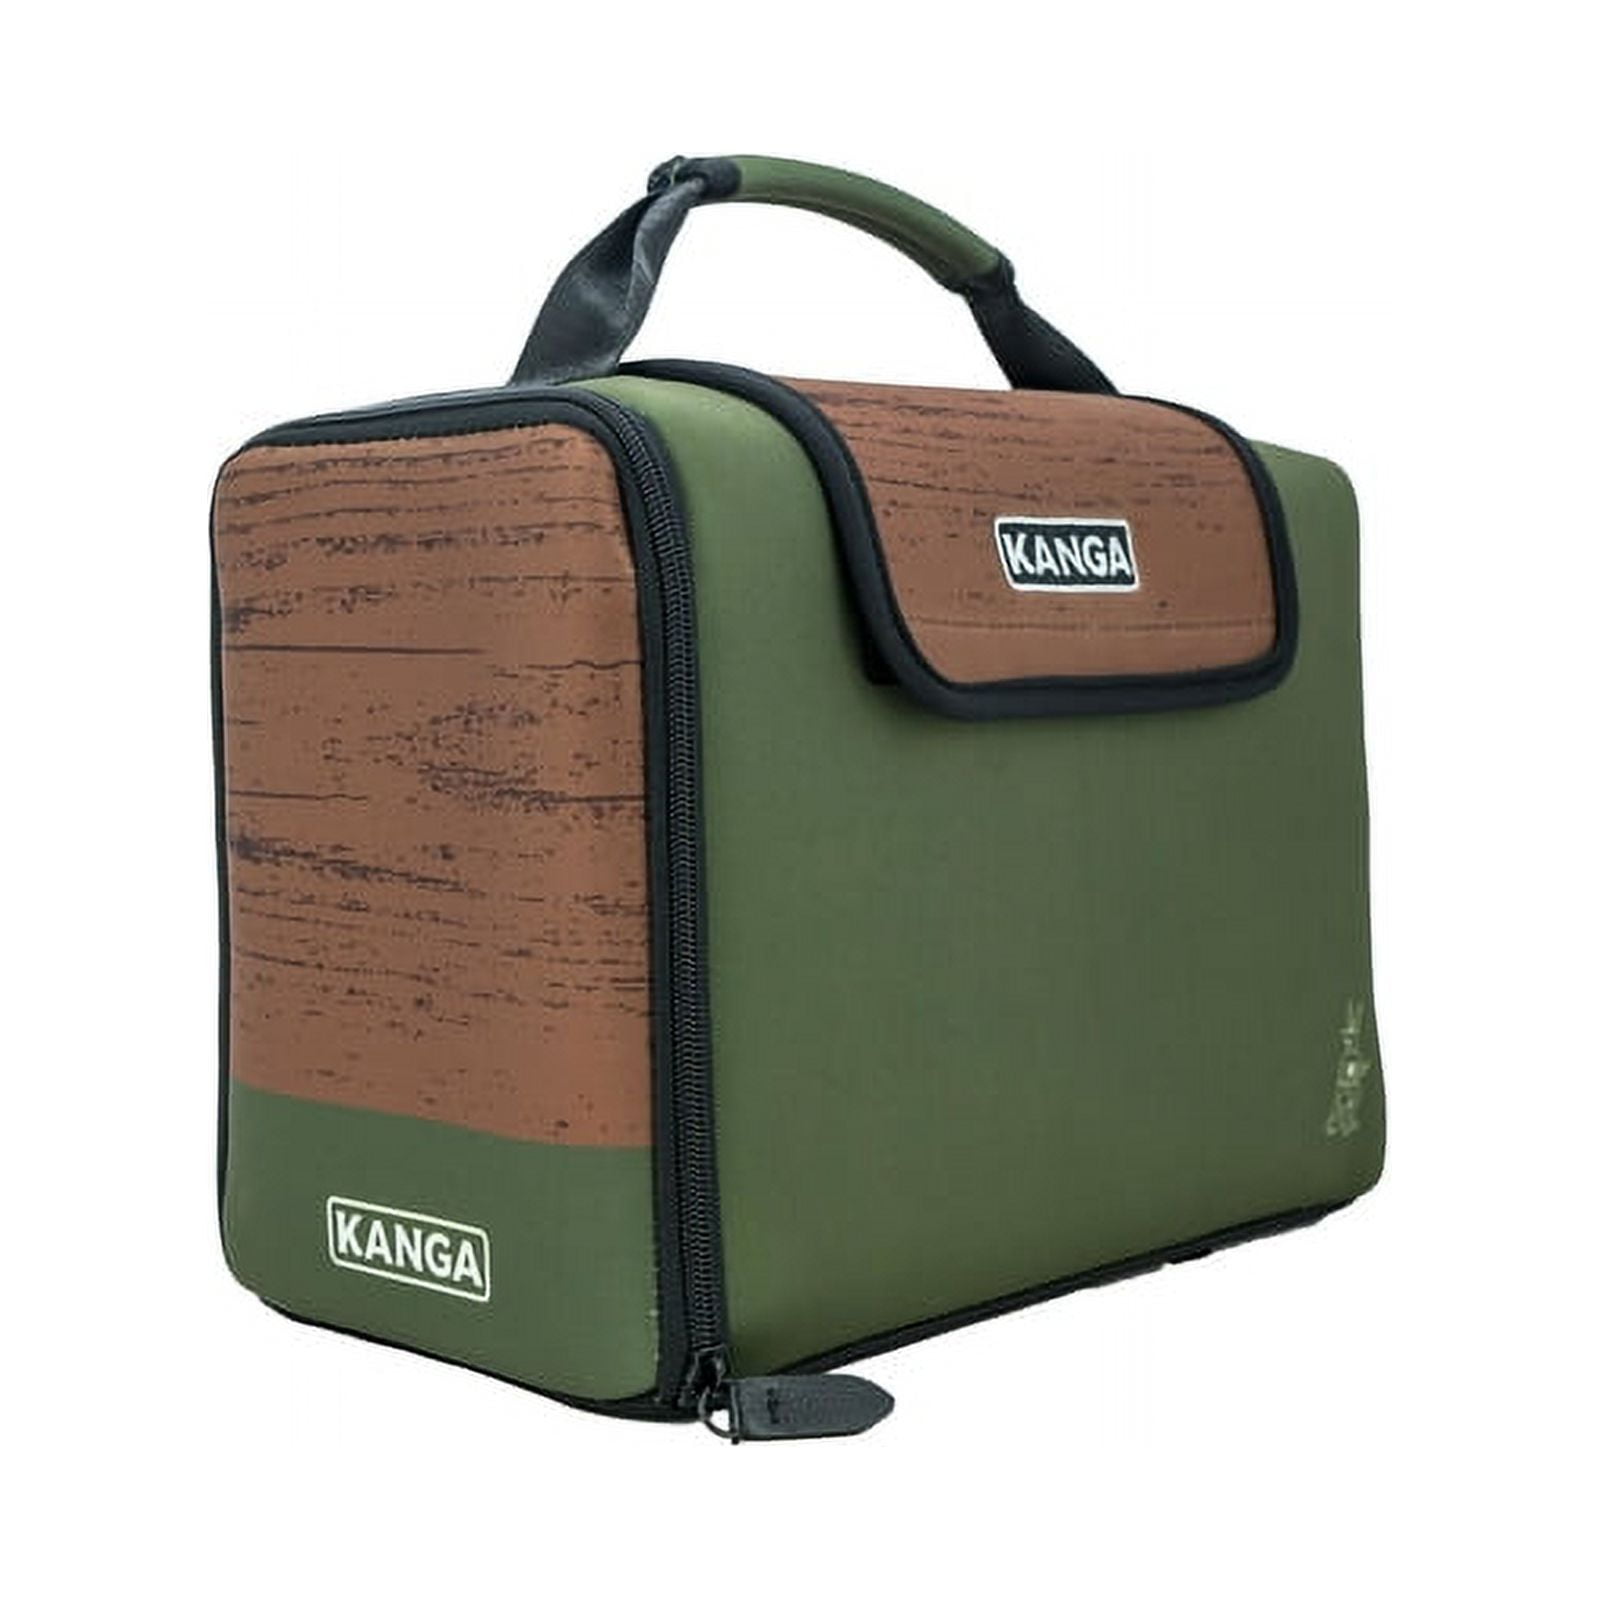 Kanga Insulated Cooler Bag - Soft Cooler Bag - Can Beer and Seltzer Drink  Cooler - Insulated and Durability Tested - Kanga Kase Mate